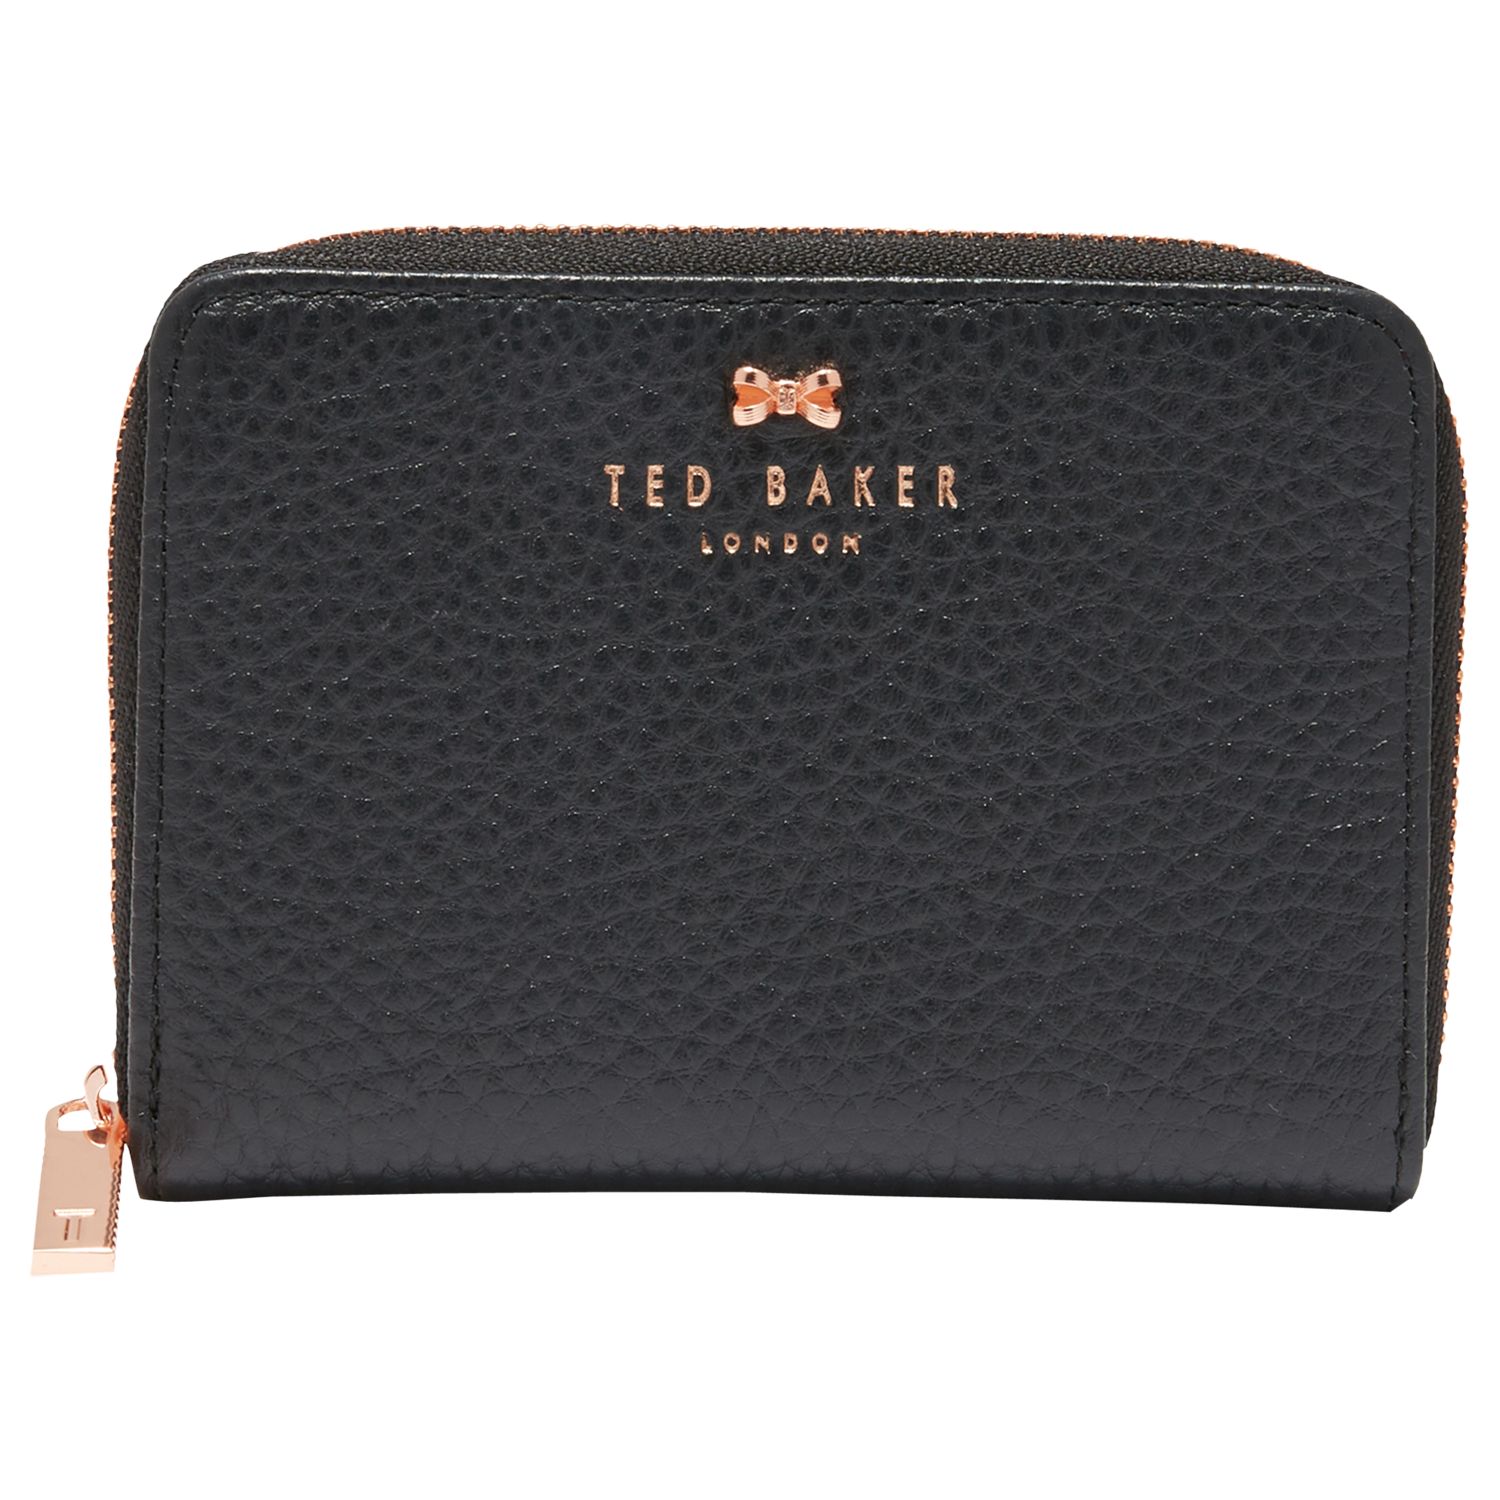 Ted Baker Plie Mini Bow Zip Around Leather Purse